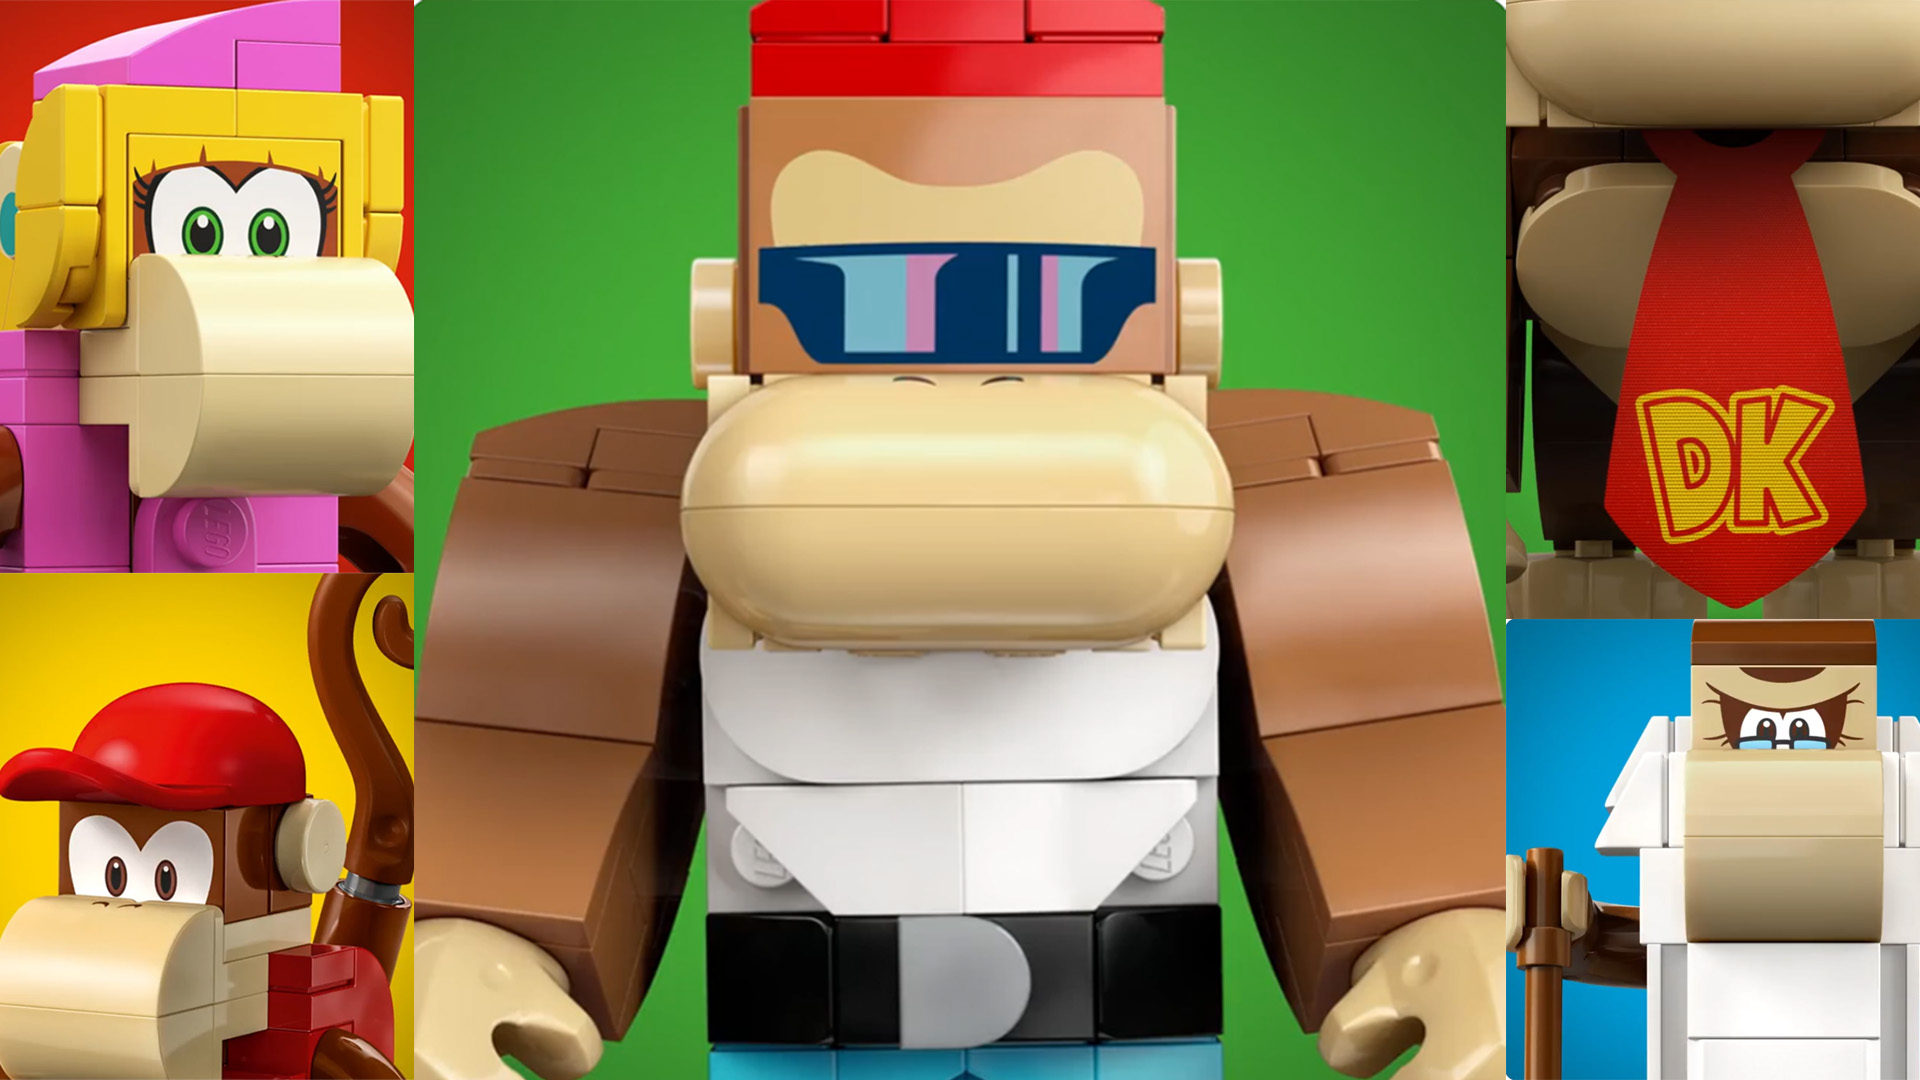 Dixie, Cranky, Diddy, and Funky Kong have made their debut in LEGO Mario teaser - Wire